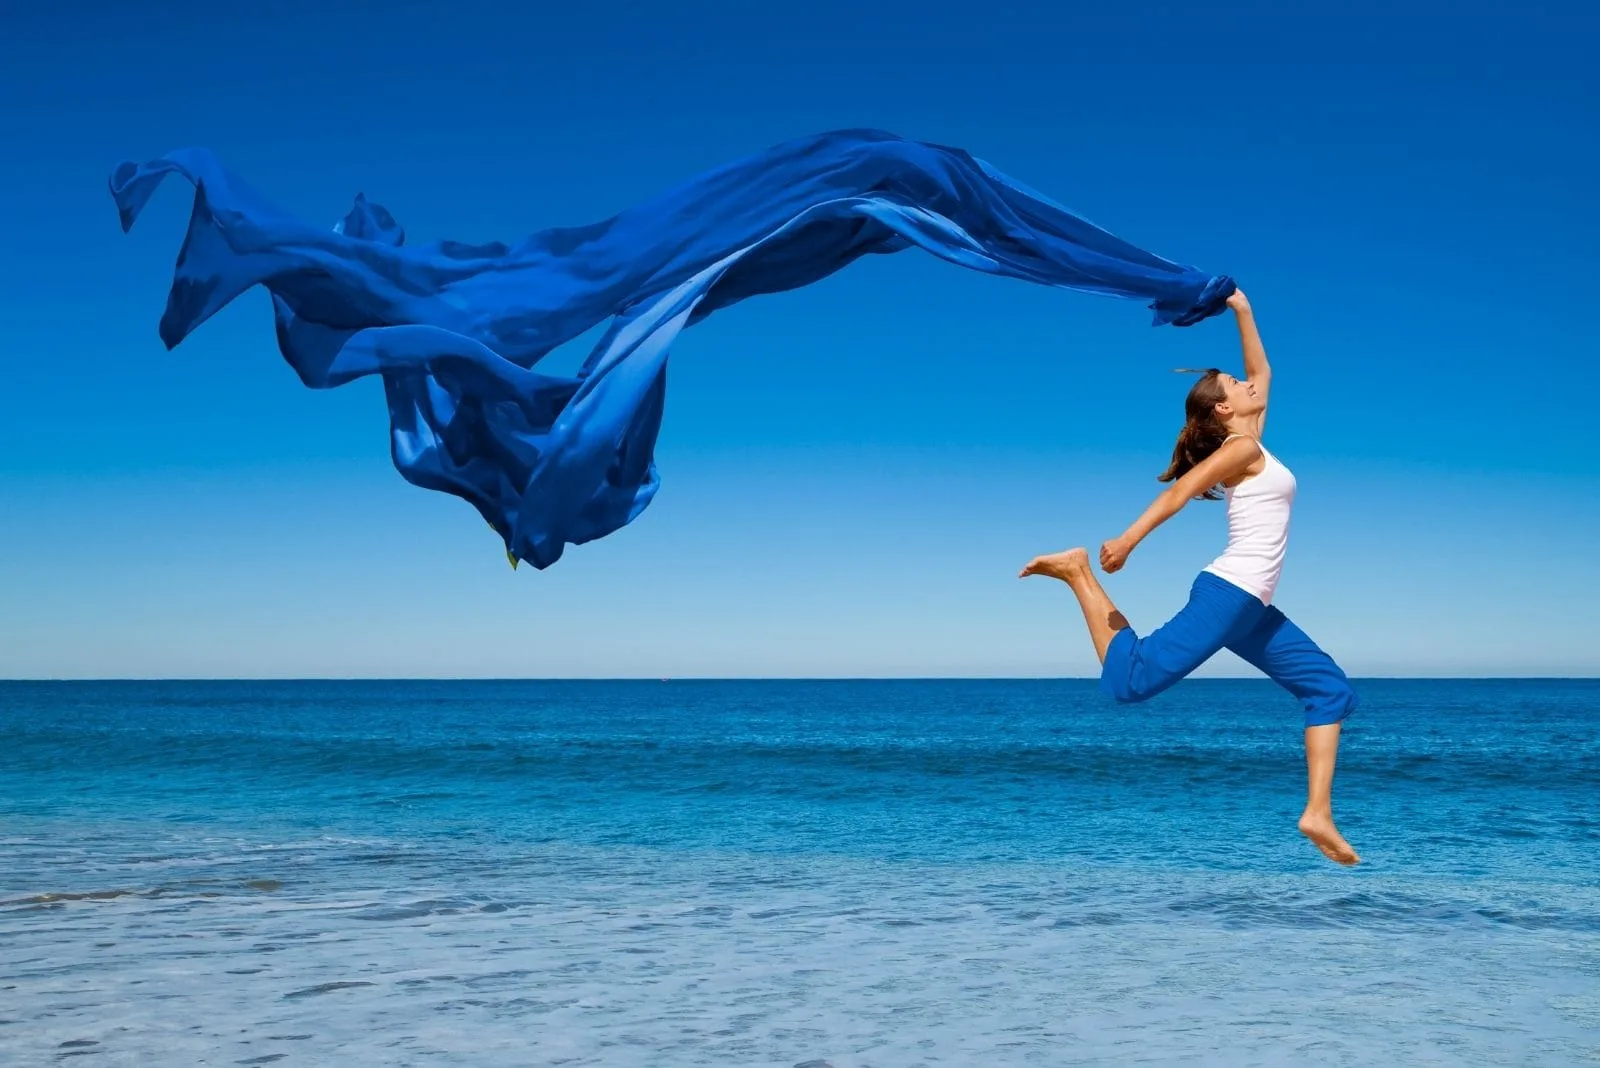 woman jump with joy near the blue sea carrying a blue cloth blown by the wind